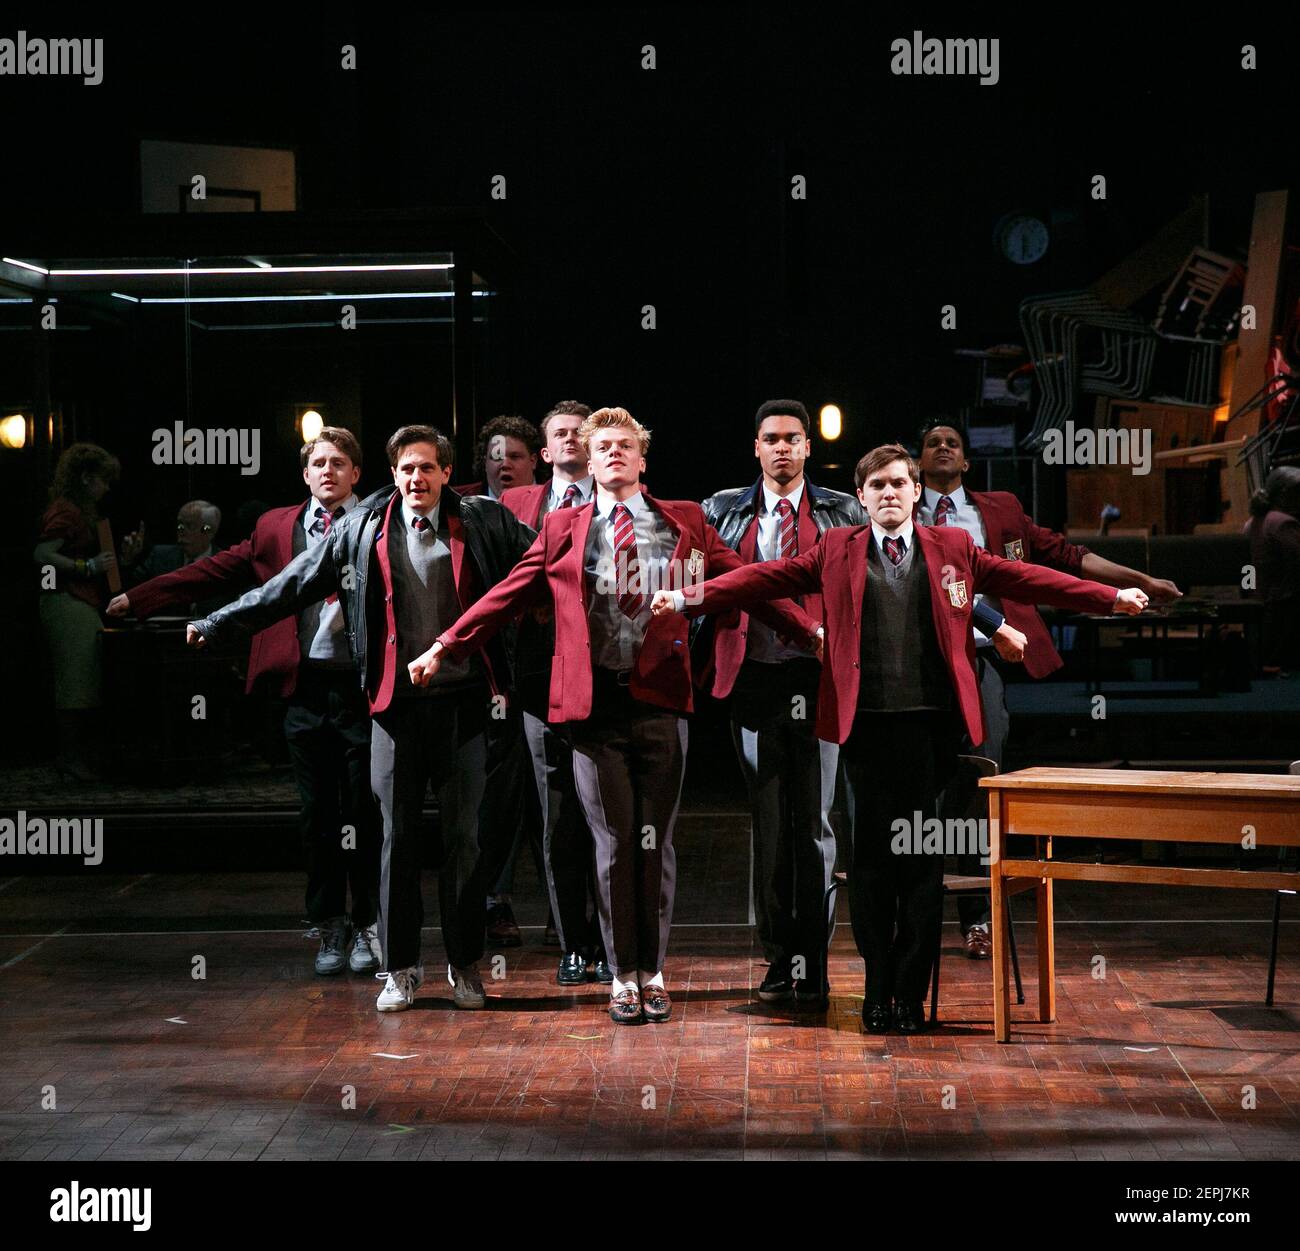 l-r: Ross Anderson (Rudge), Will Featherstone (Cripps), Edward Judge (Timms), Edwin Thomas (Irwin), Tom Rhys Harries (Dakin), Rege-Jean Page (Crowther), Oliver Coopersmith (Posner), Nav Sidhu (Akthar) in THE HISTORY BOYS by Alan Bennett at the Crucible Theatre, Sheffield, England   22/05/2013  design: Chloe Lamford  lighting: Neil Austin  director: Michael Longhurst Stock Photo